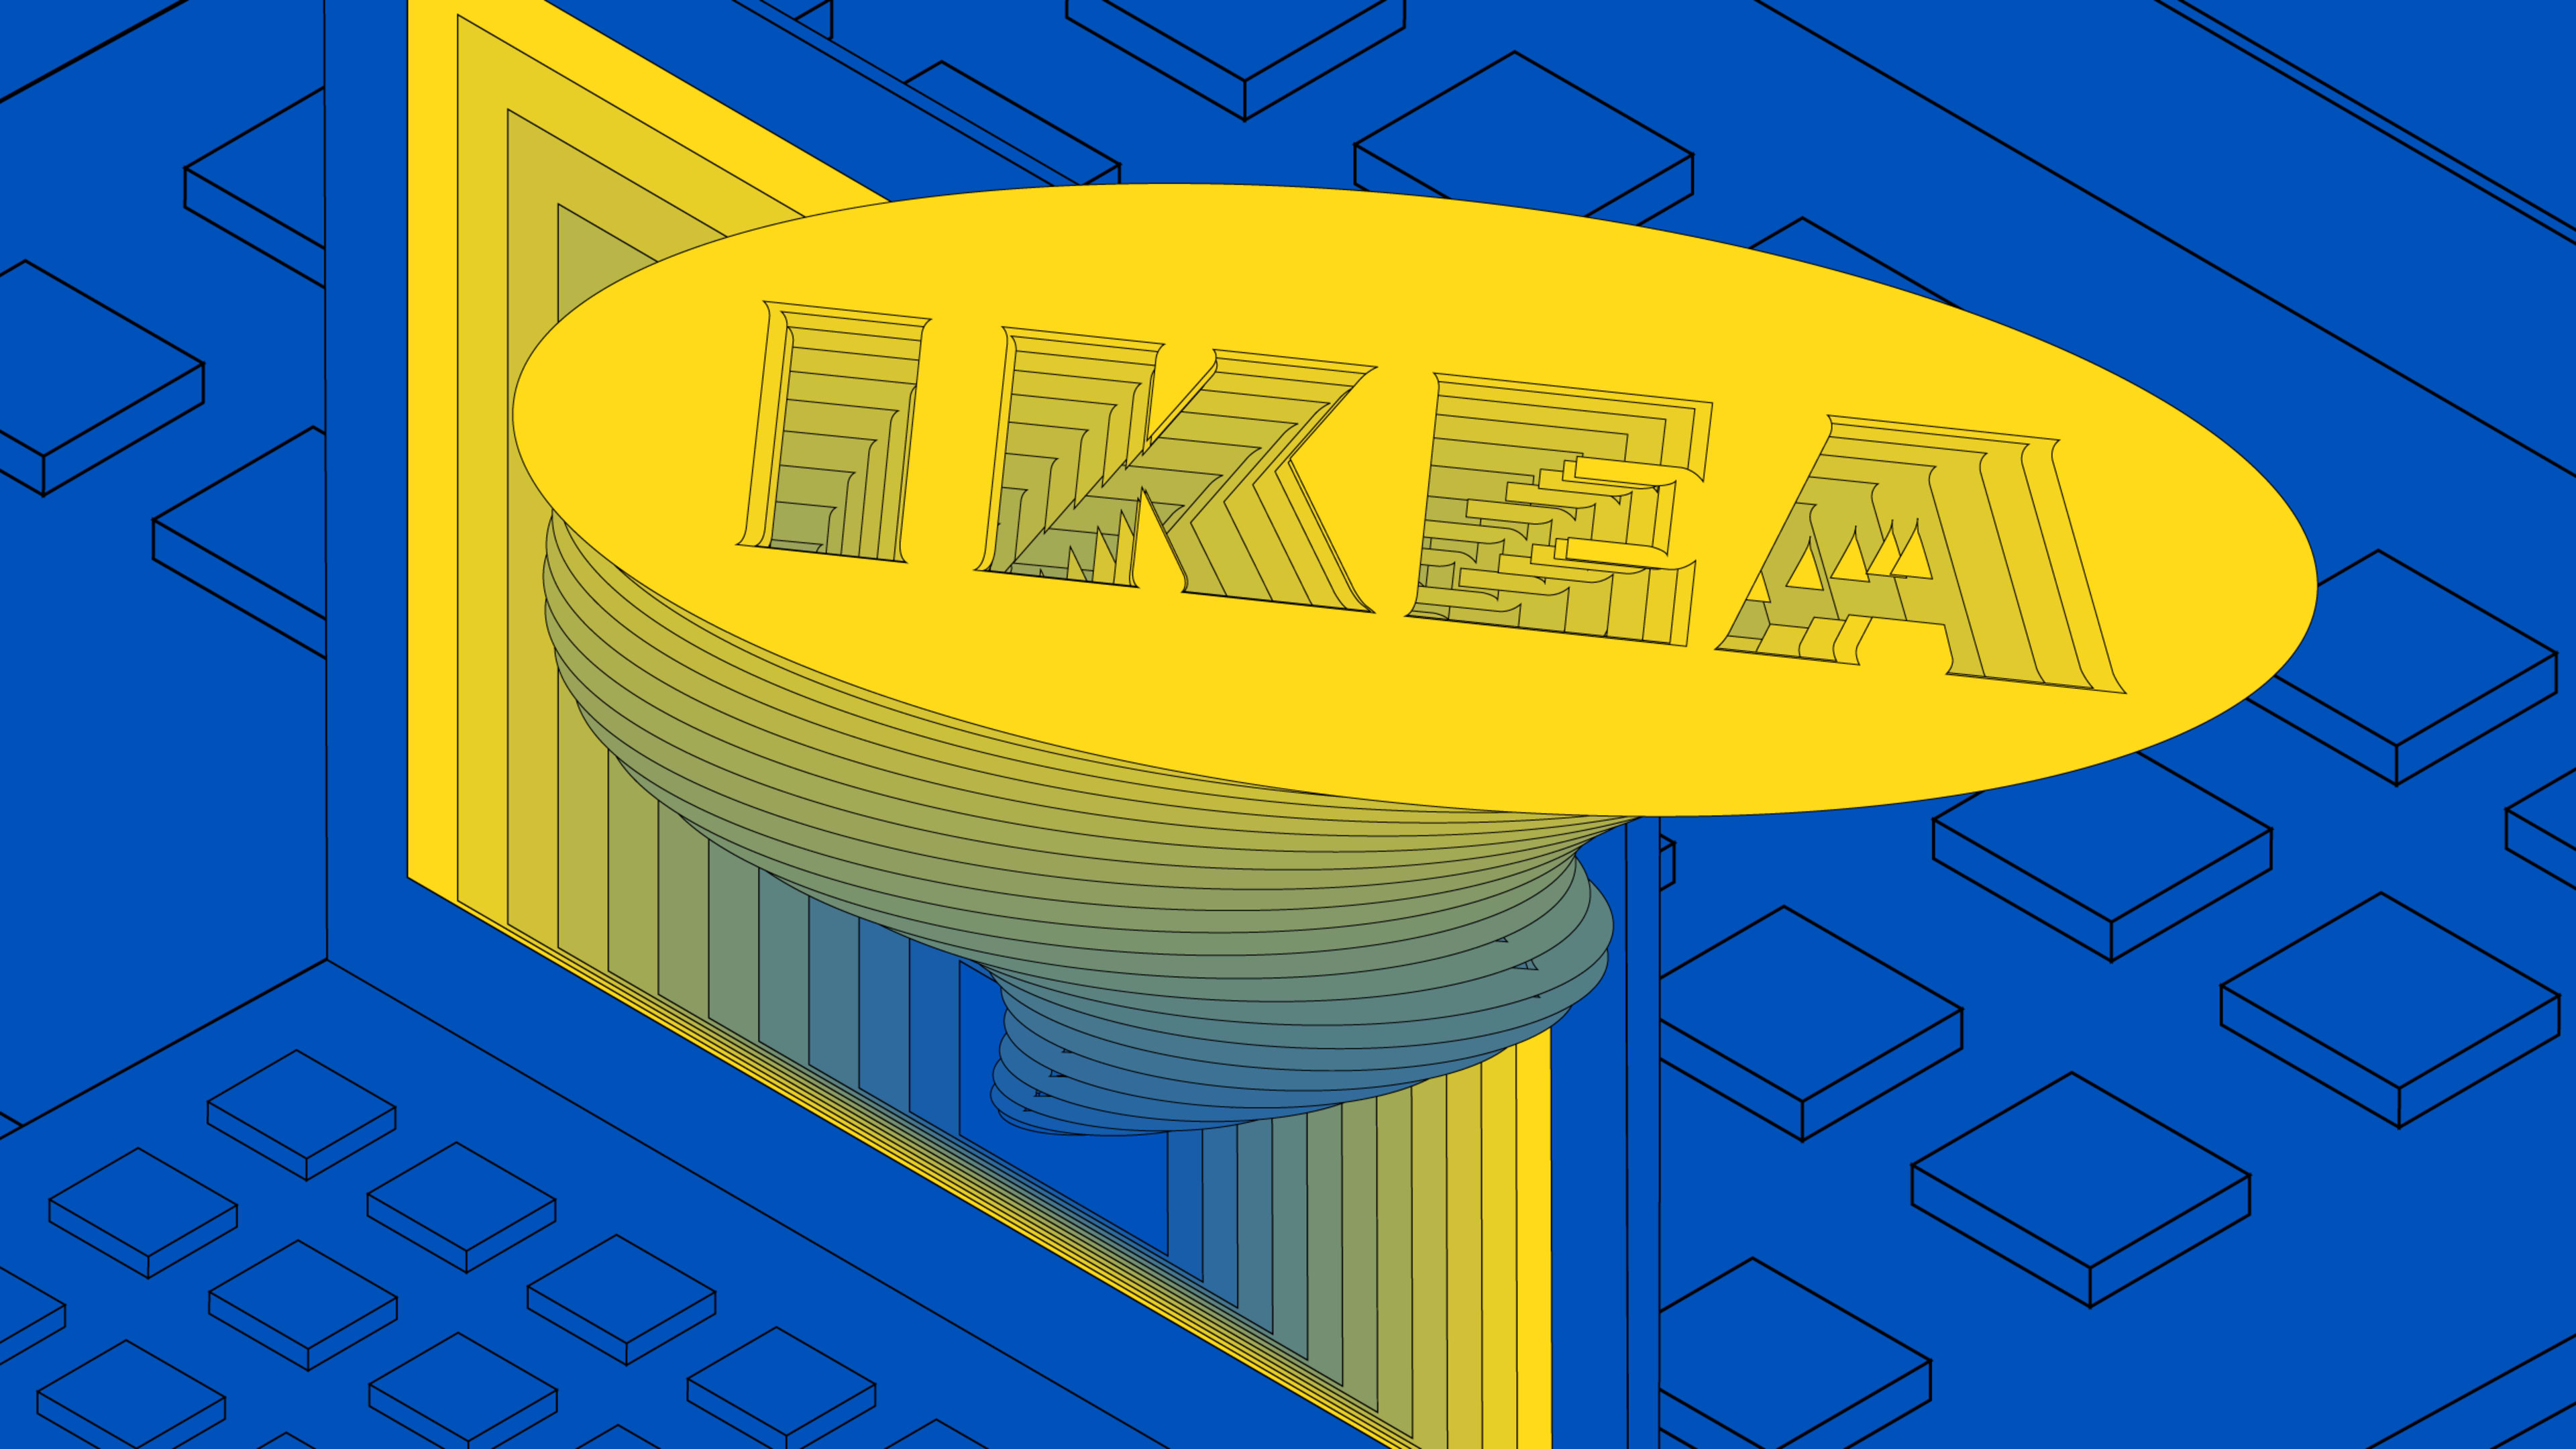 Ikea hires its first-ever global chief creative officer